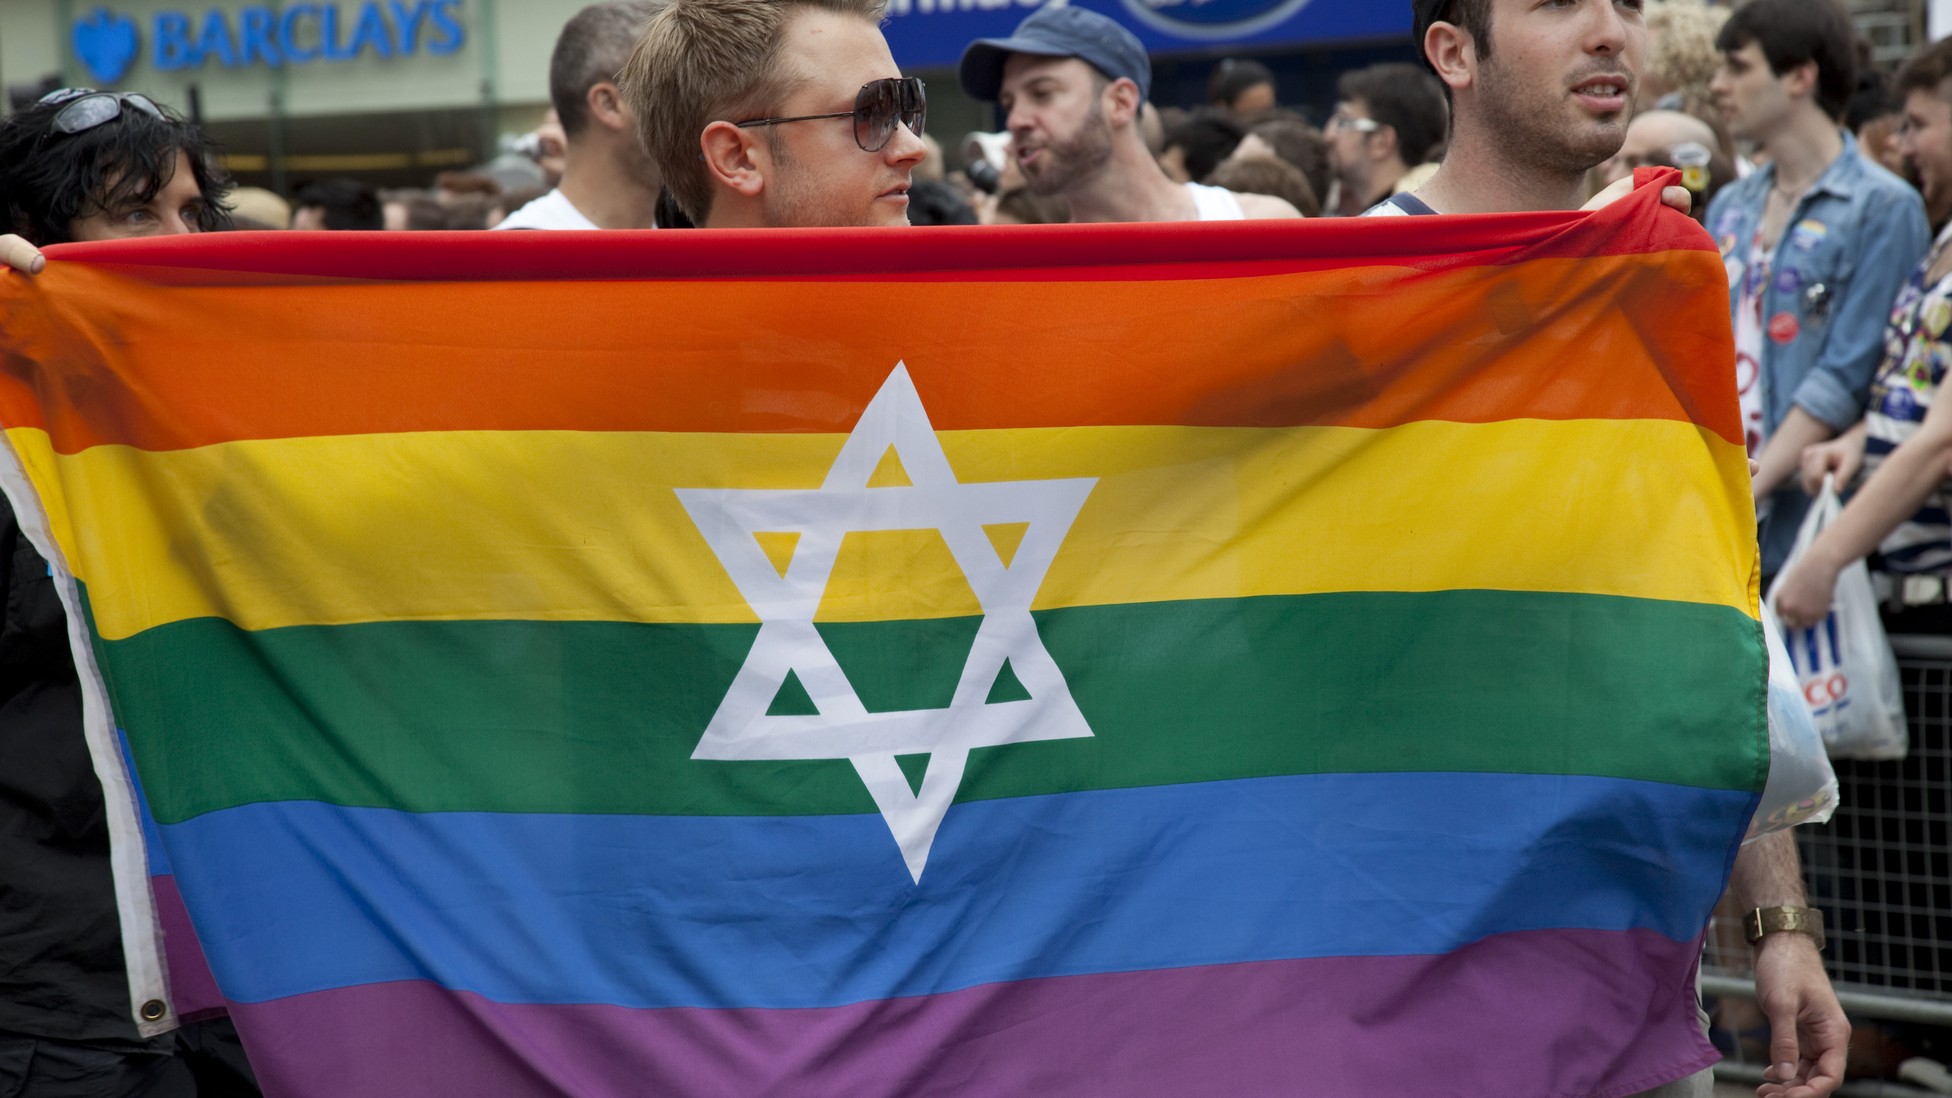 Reform Jews Extend an Unprecedented Welcome to Transgender People The